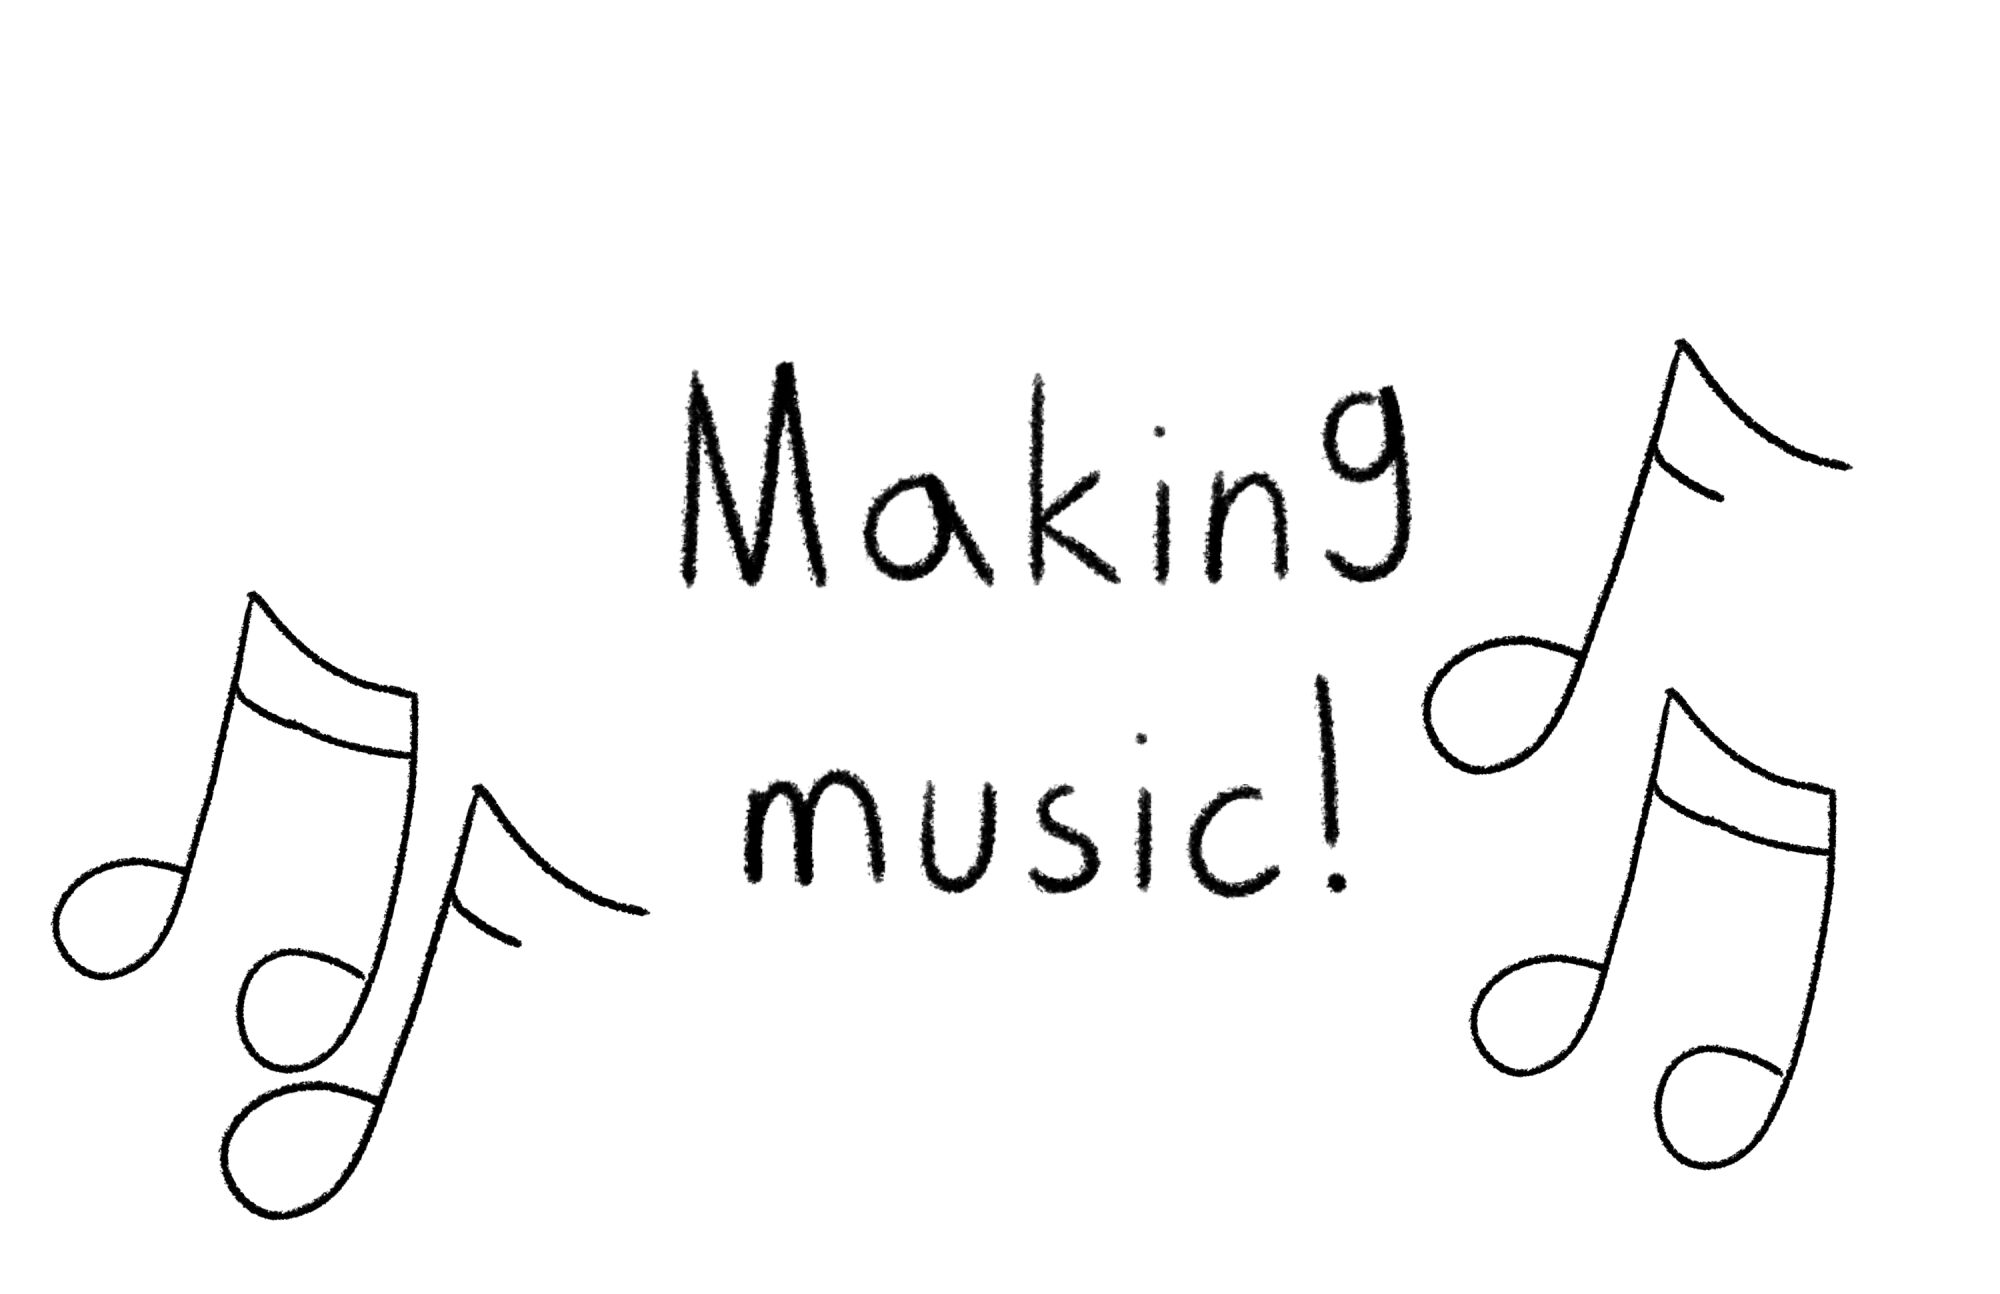 The words "making music," accompanied by music notes.